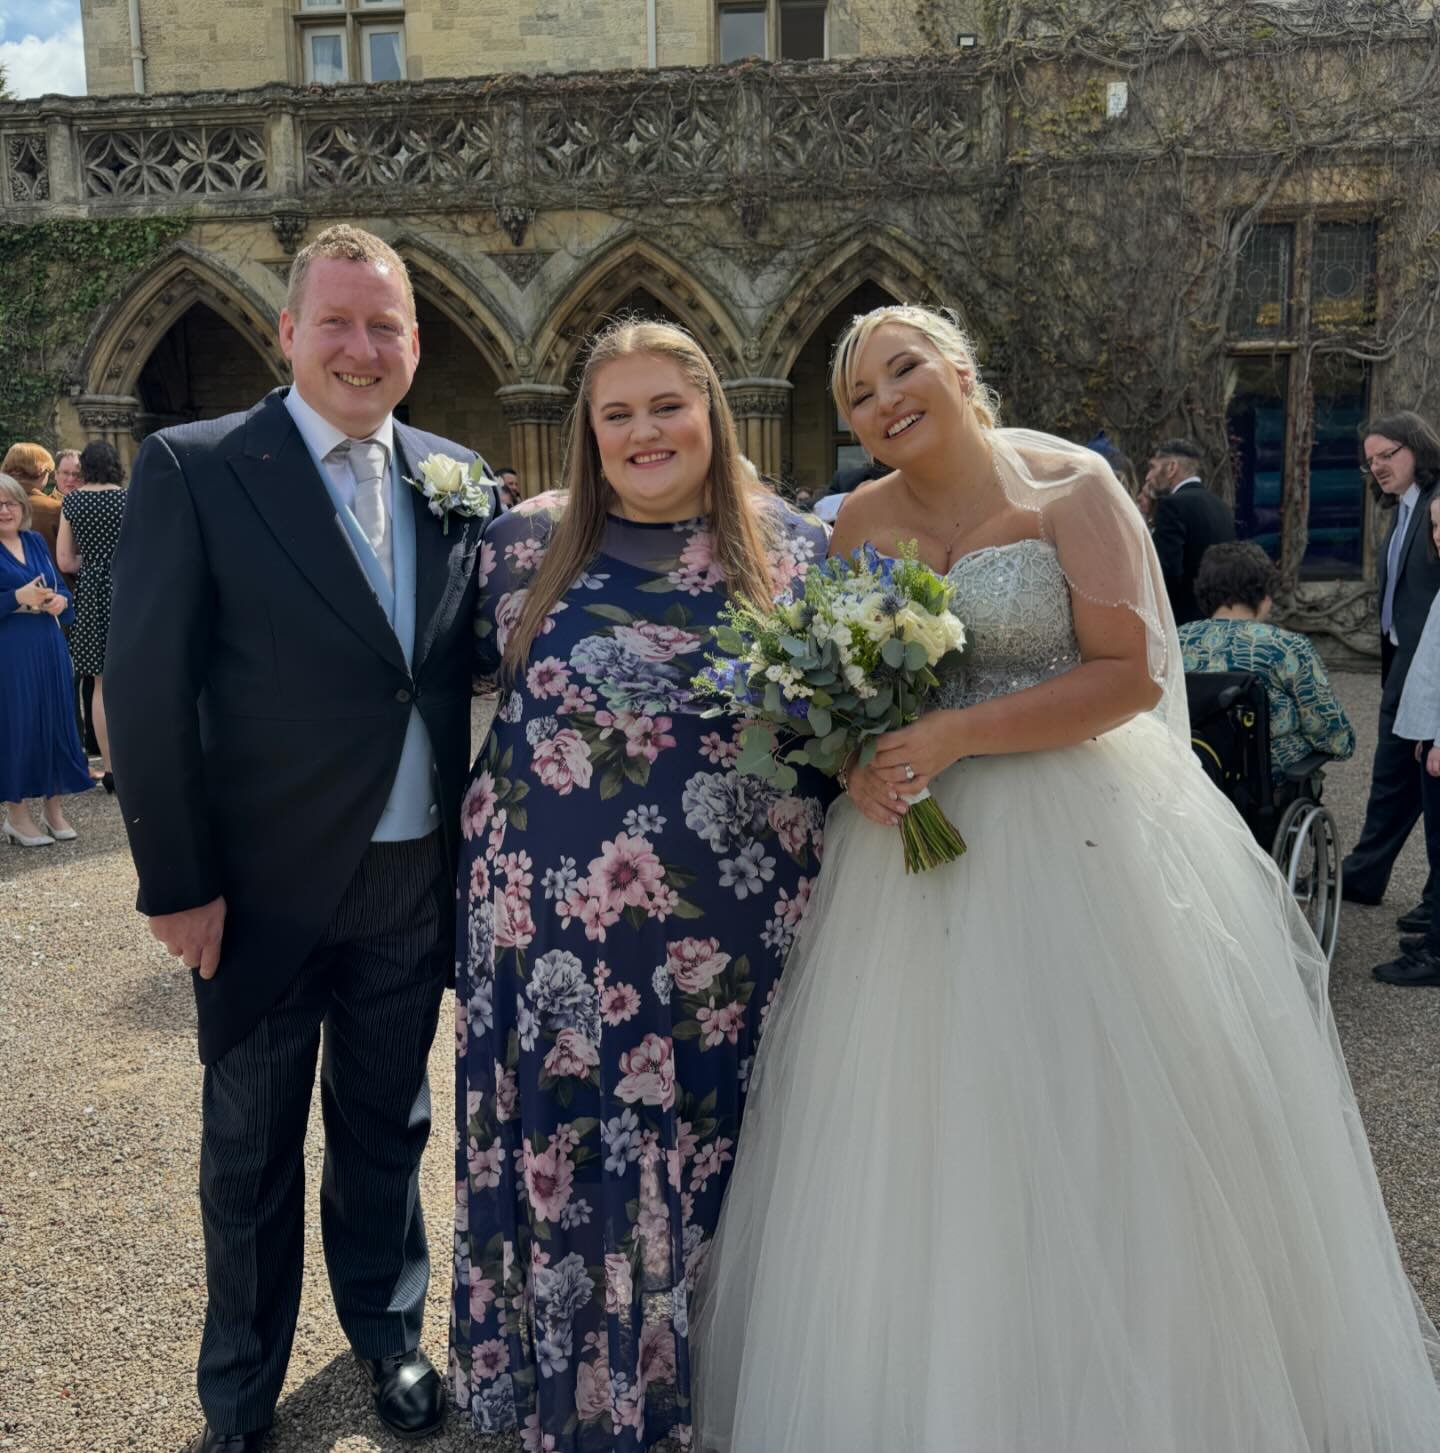 ✨ Mr and Mrs Salt - 4th May 2024 ✨

This was my first wedding at the gorgeous @manorbythelake and it certainly did not disappoint! 💚

The weather came through and Mr and Mrs Salt had the most beautiful outdoor ceremony in the Italian Pavillion. It w